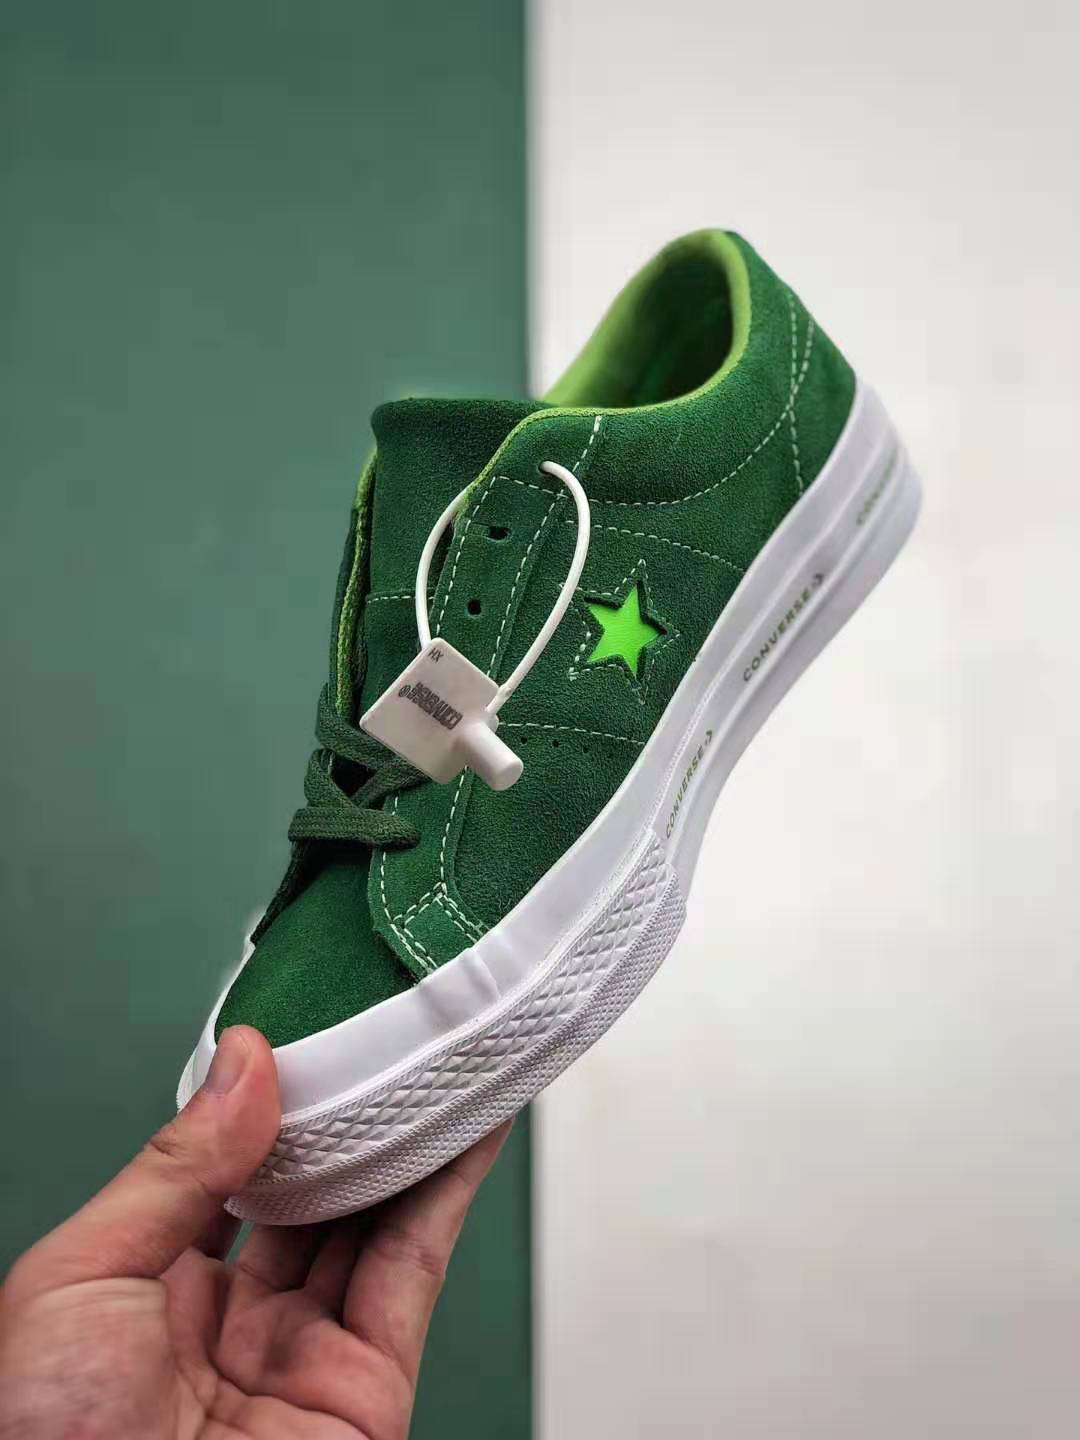 Converse One Star Low 'Mint Green' 159816C - Stylish and Fresh Footwear